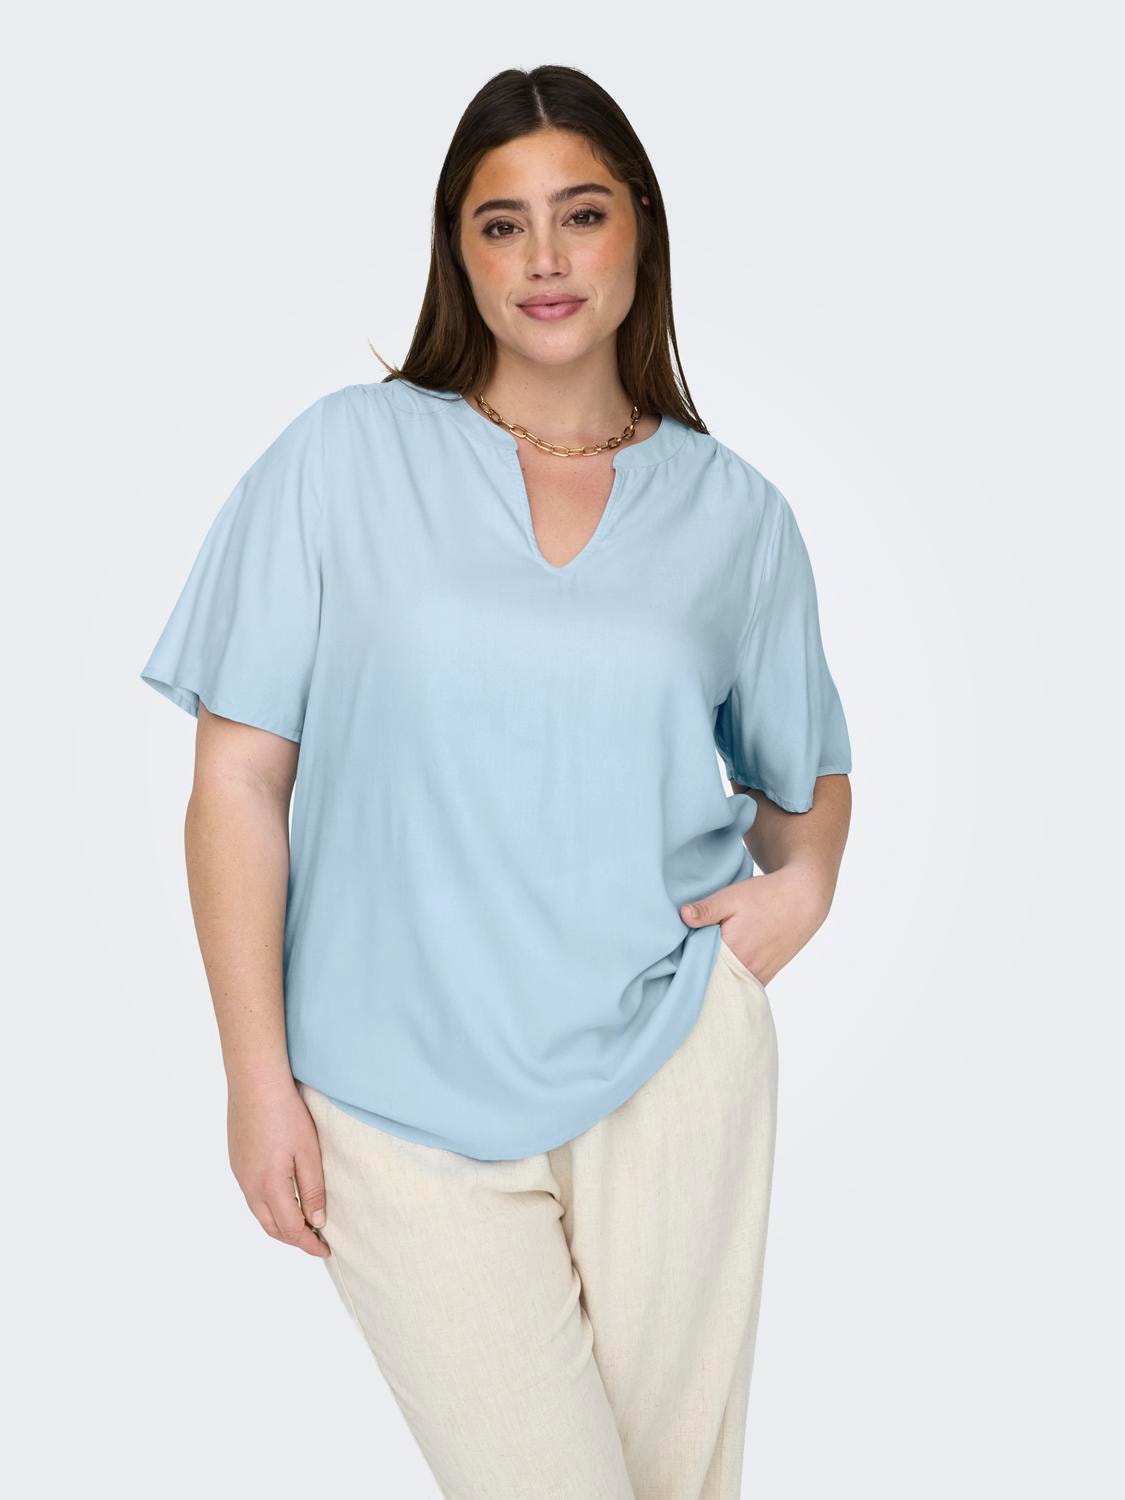 ONLY Top Regular Fit Scollo a V -Clear Sky - 15315829